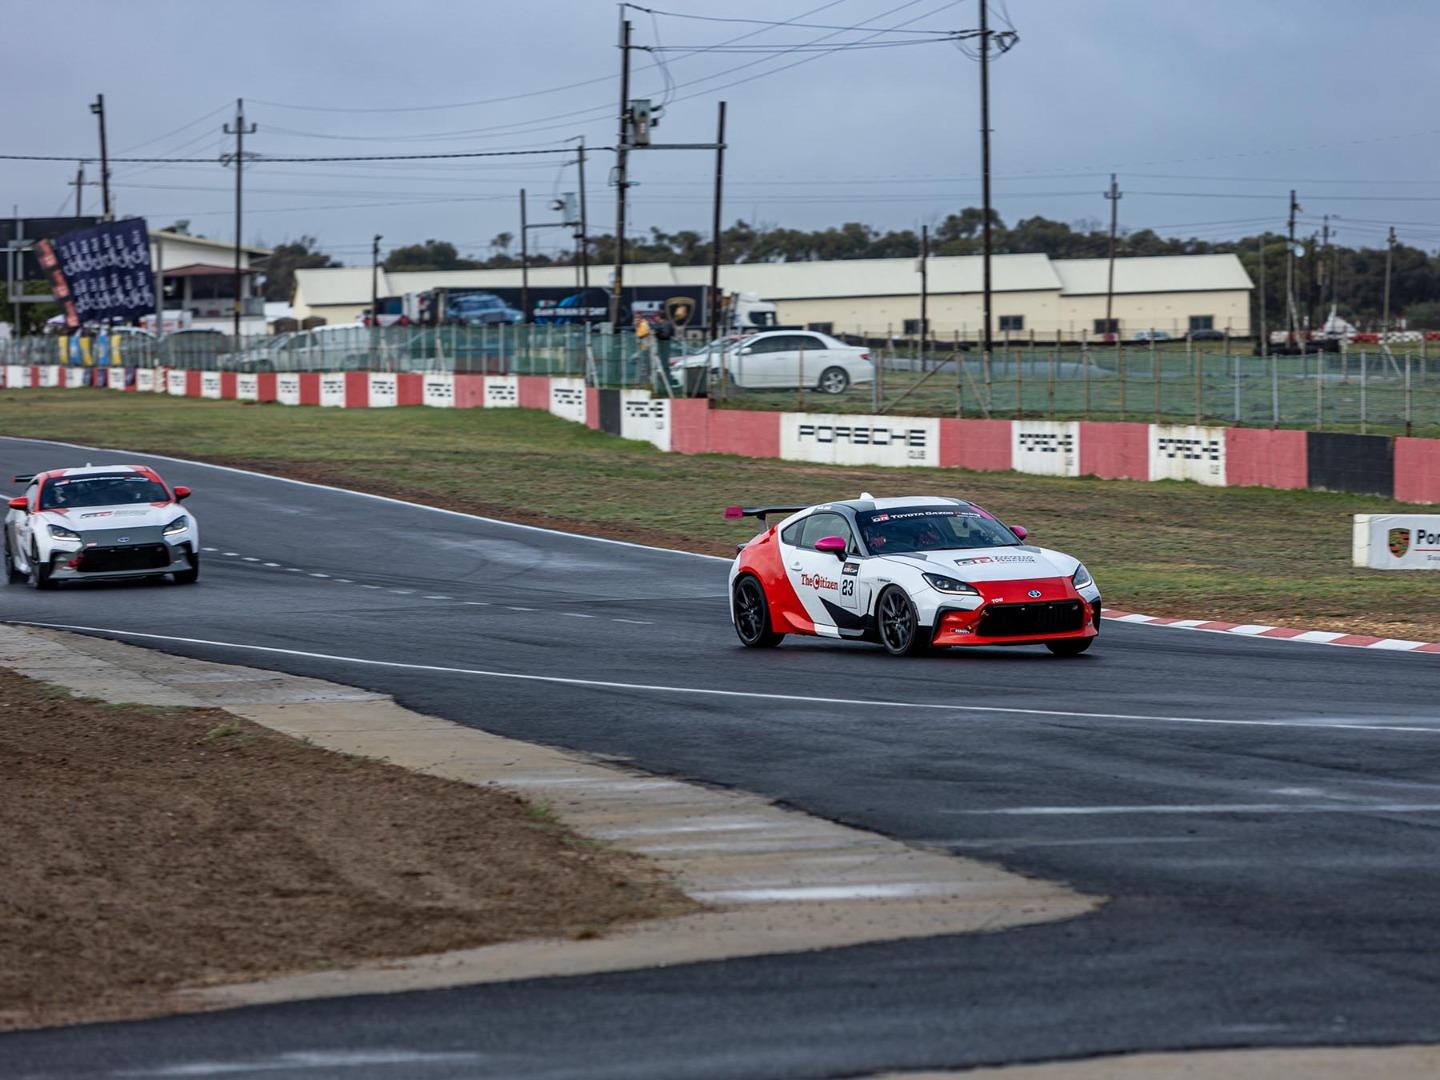 toyota gr cup at extreme festival nationals - how to lose the lead